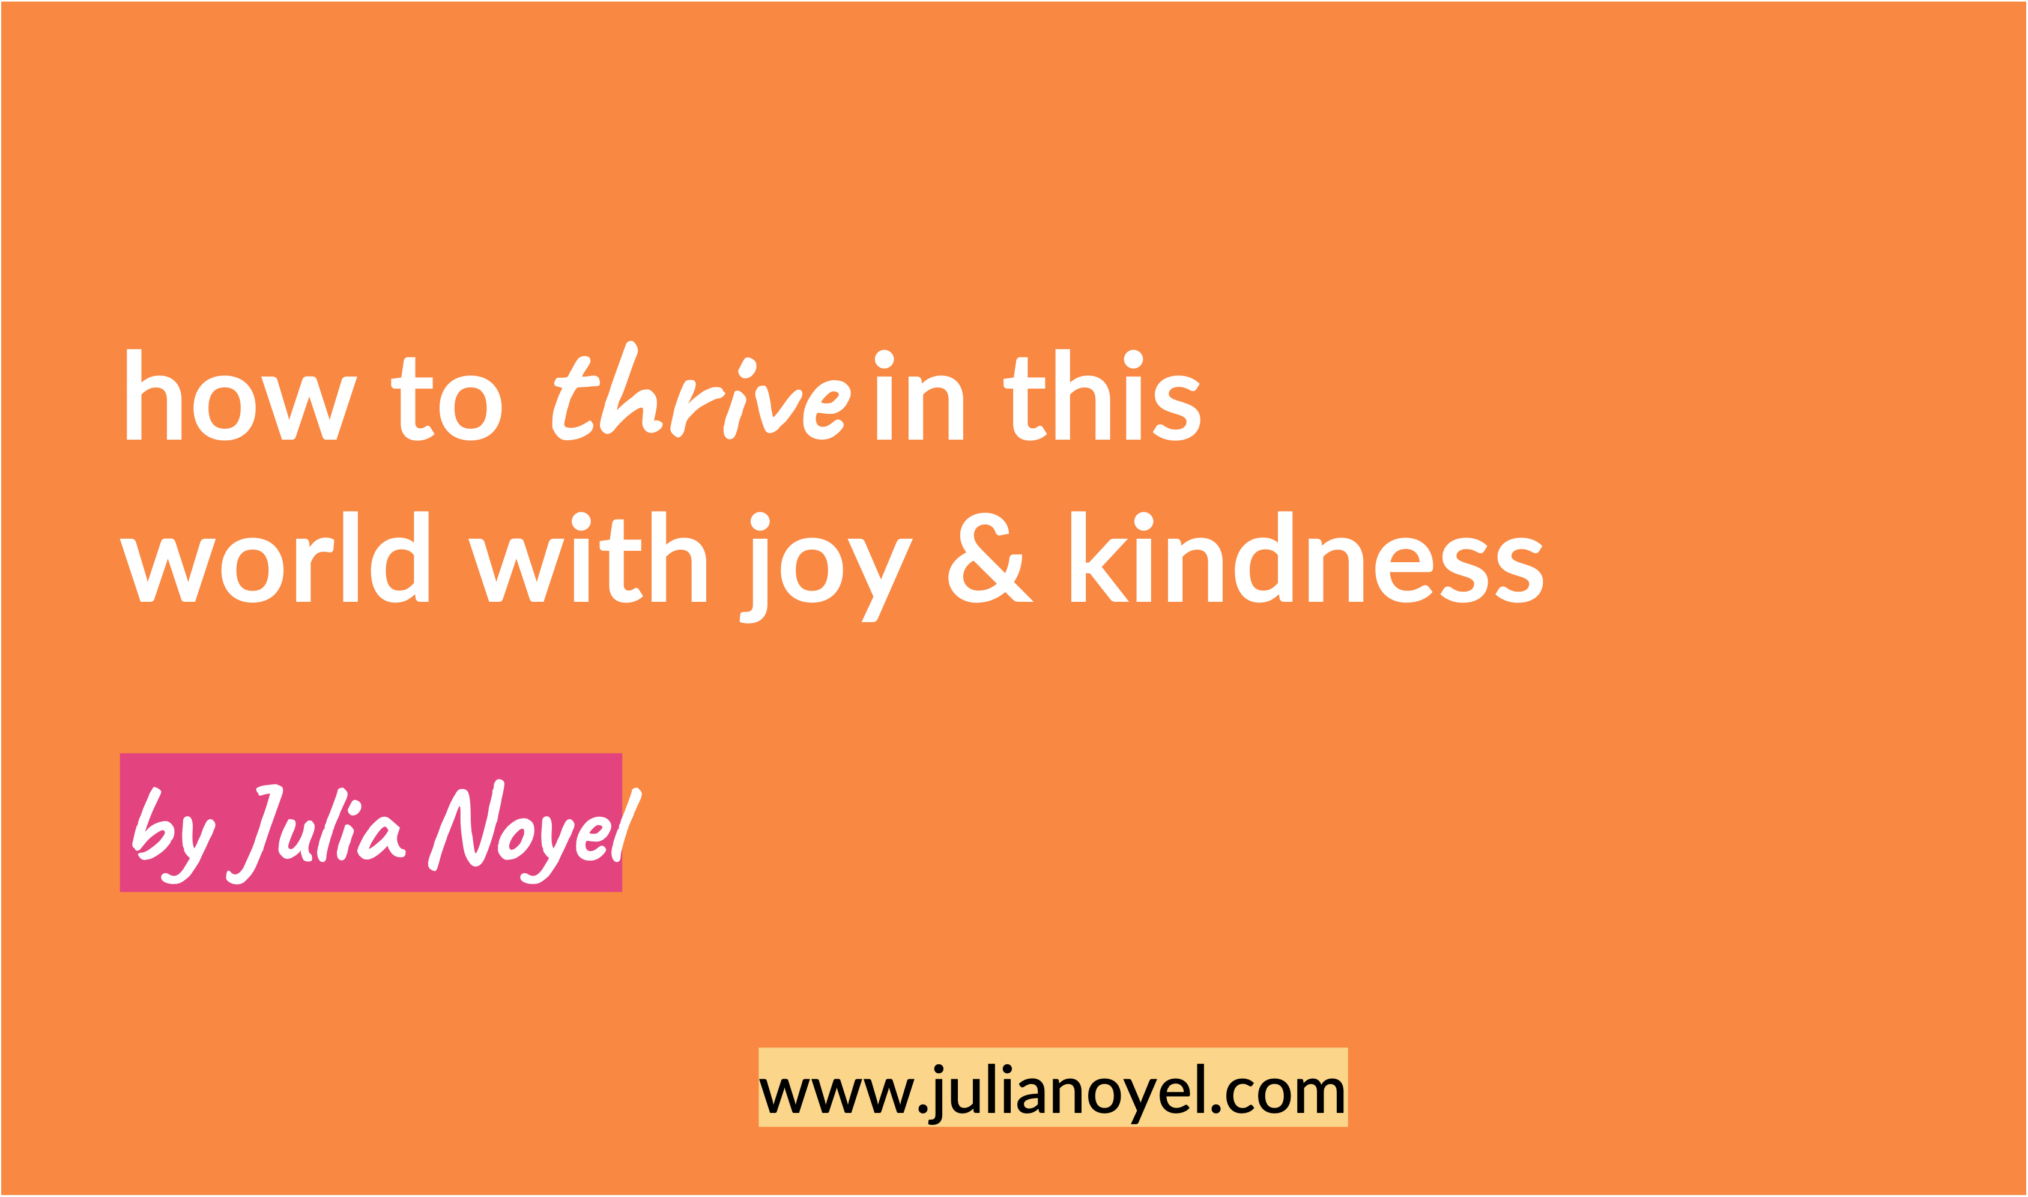 how to thrive in this world with joy & kindness by Julia Noyel